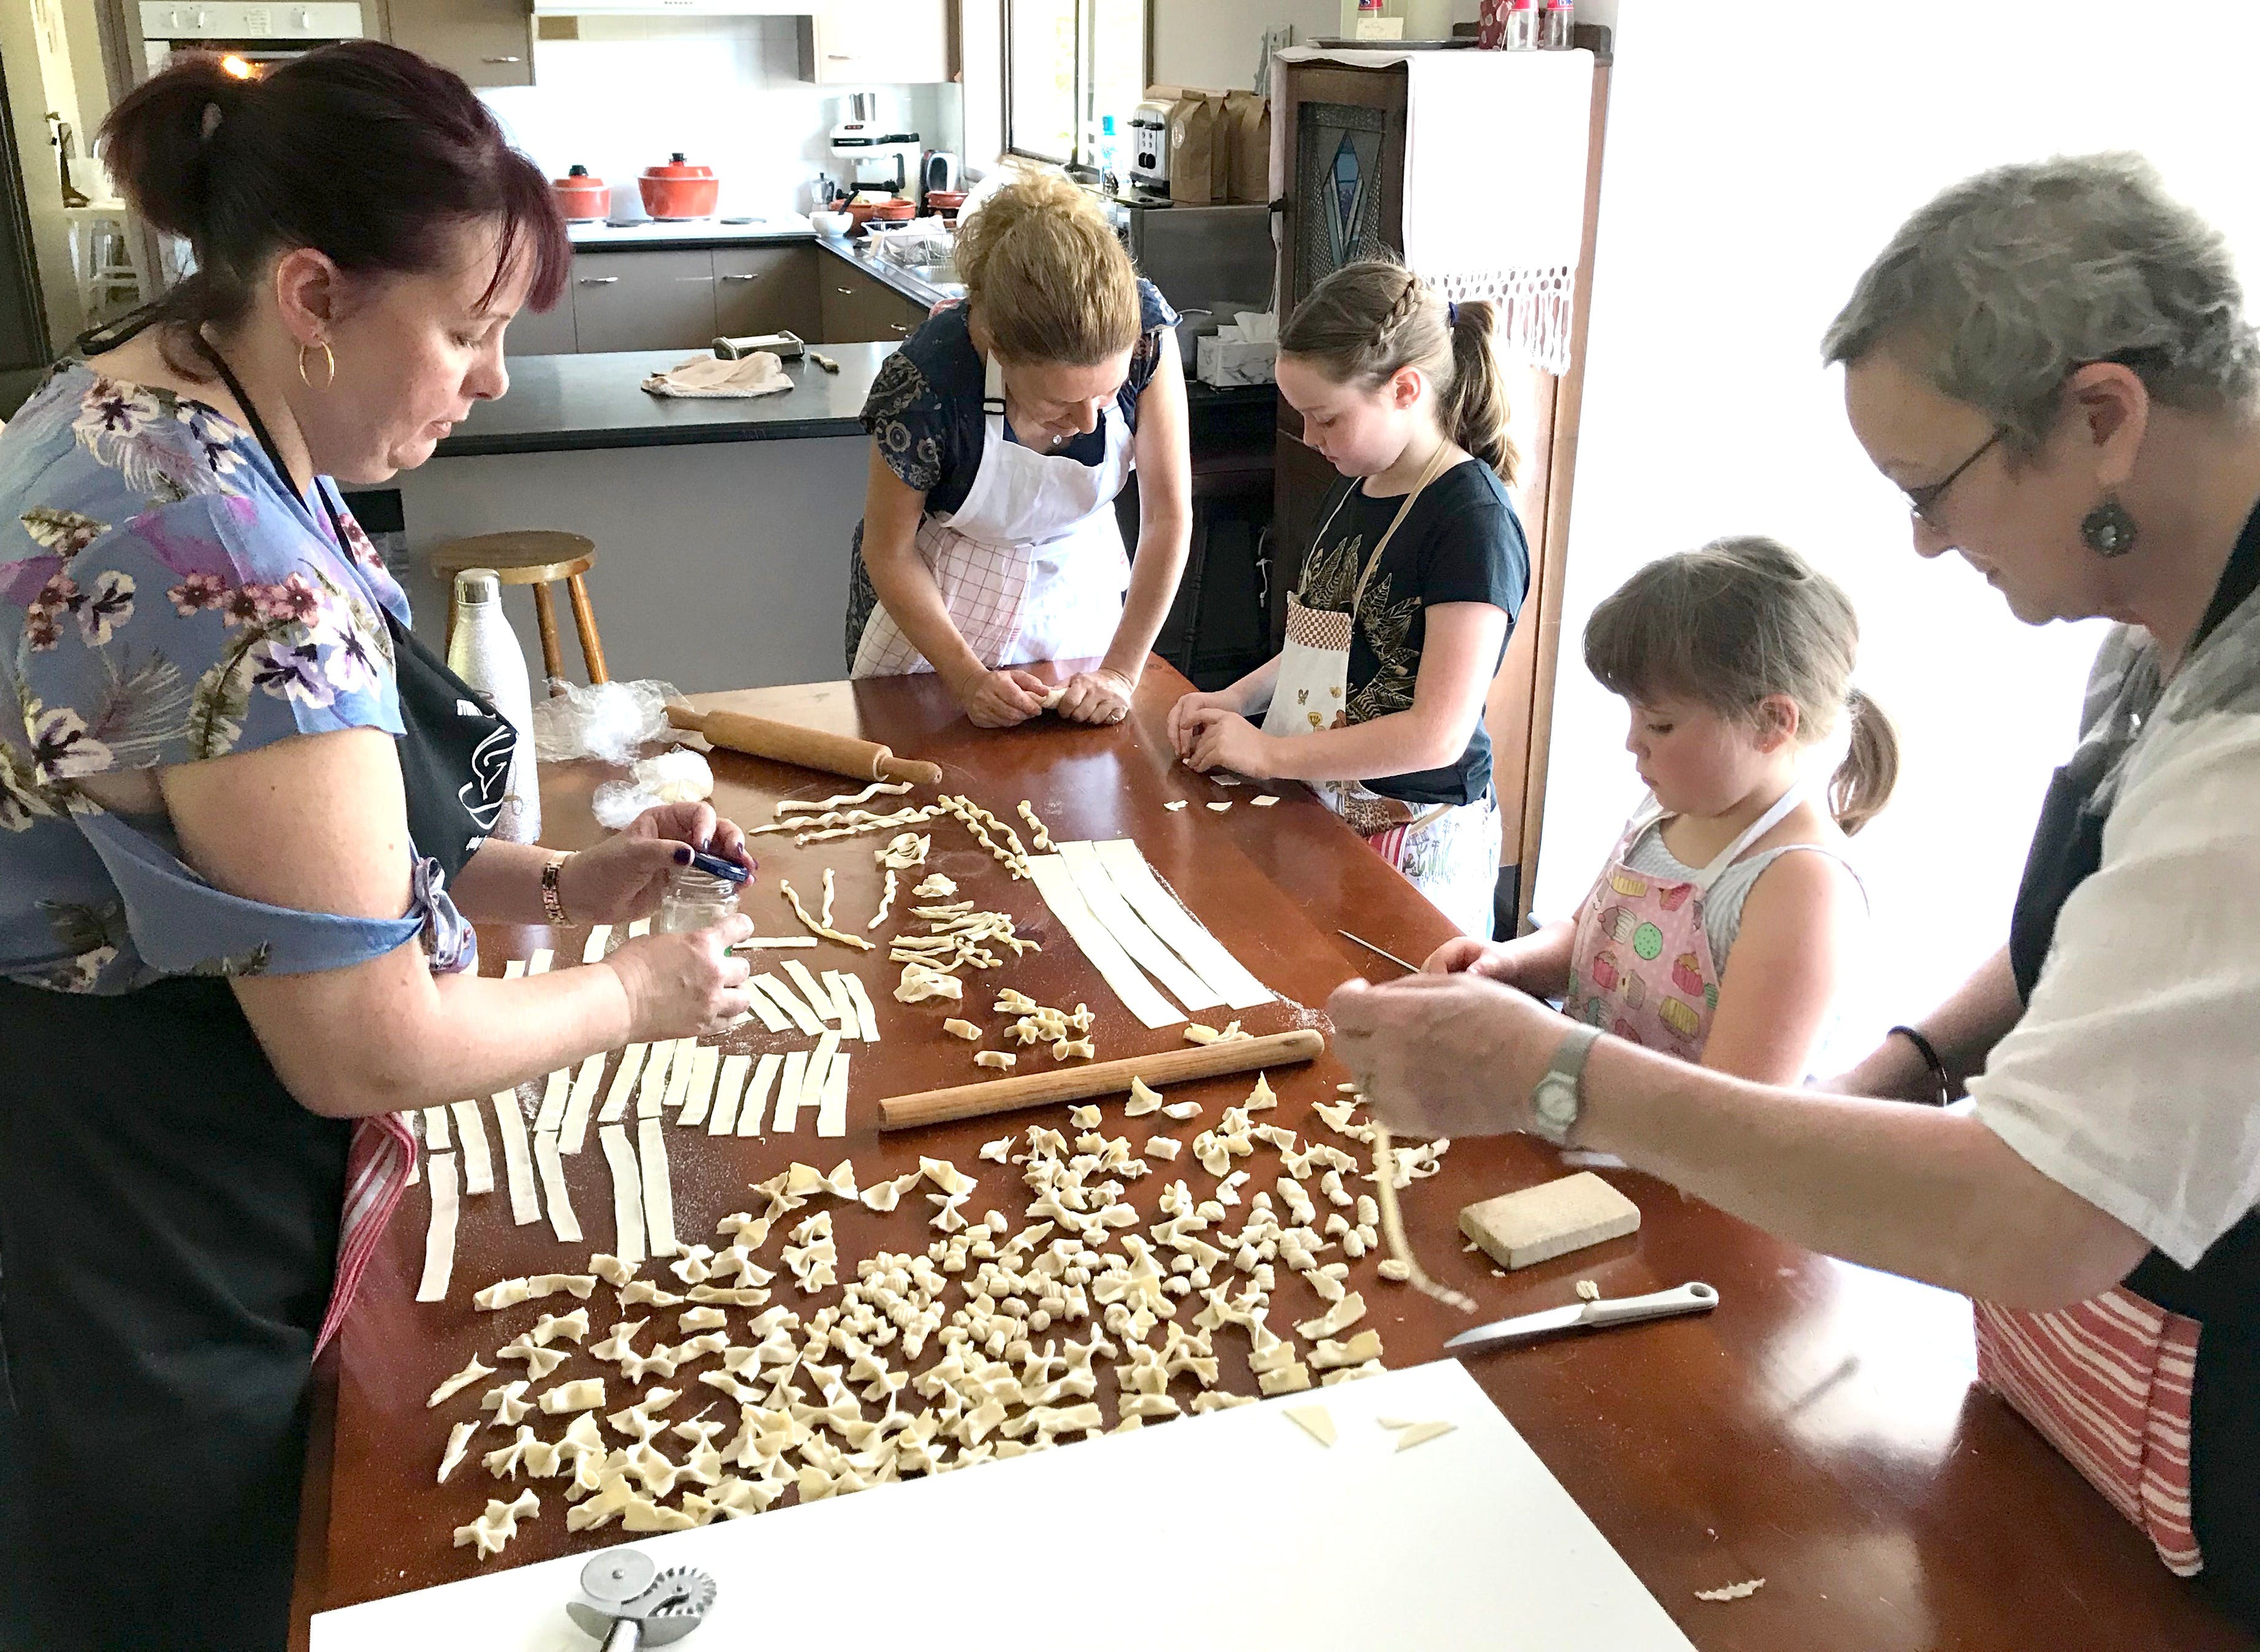 Kids Pasta Making Class - hands on fun at your house - Geraldton Accommodation